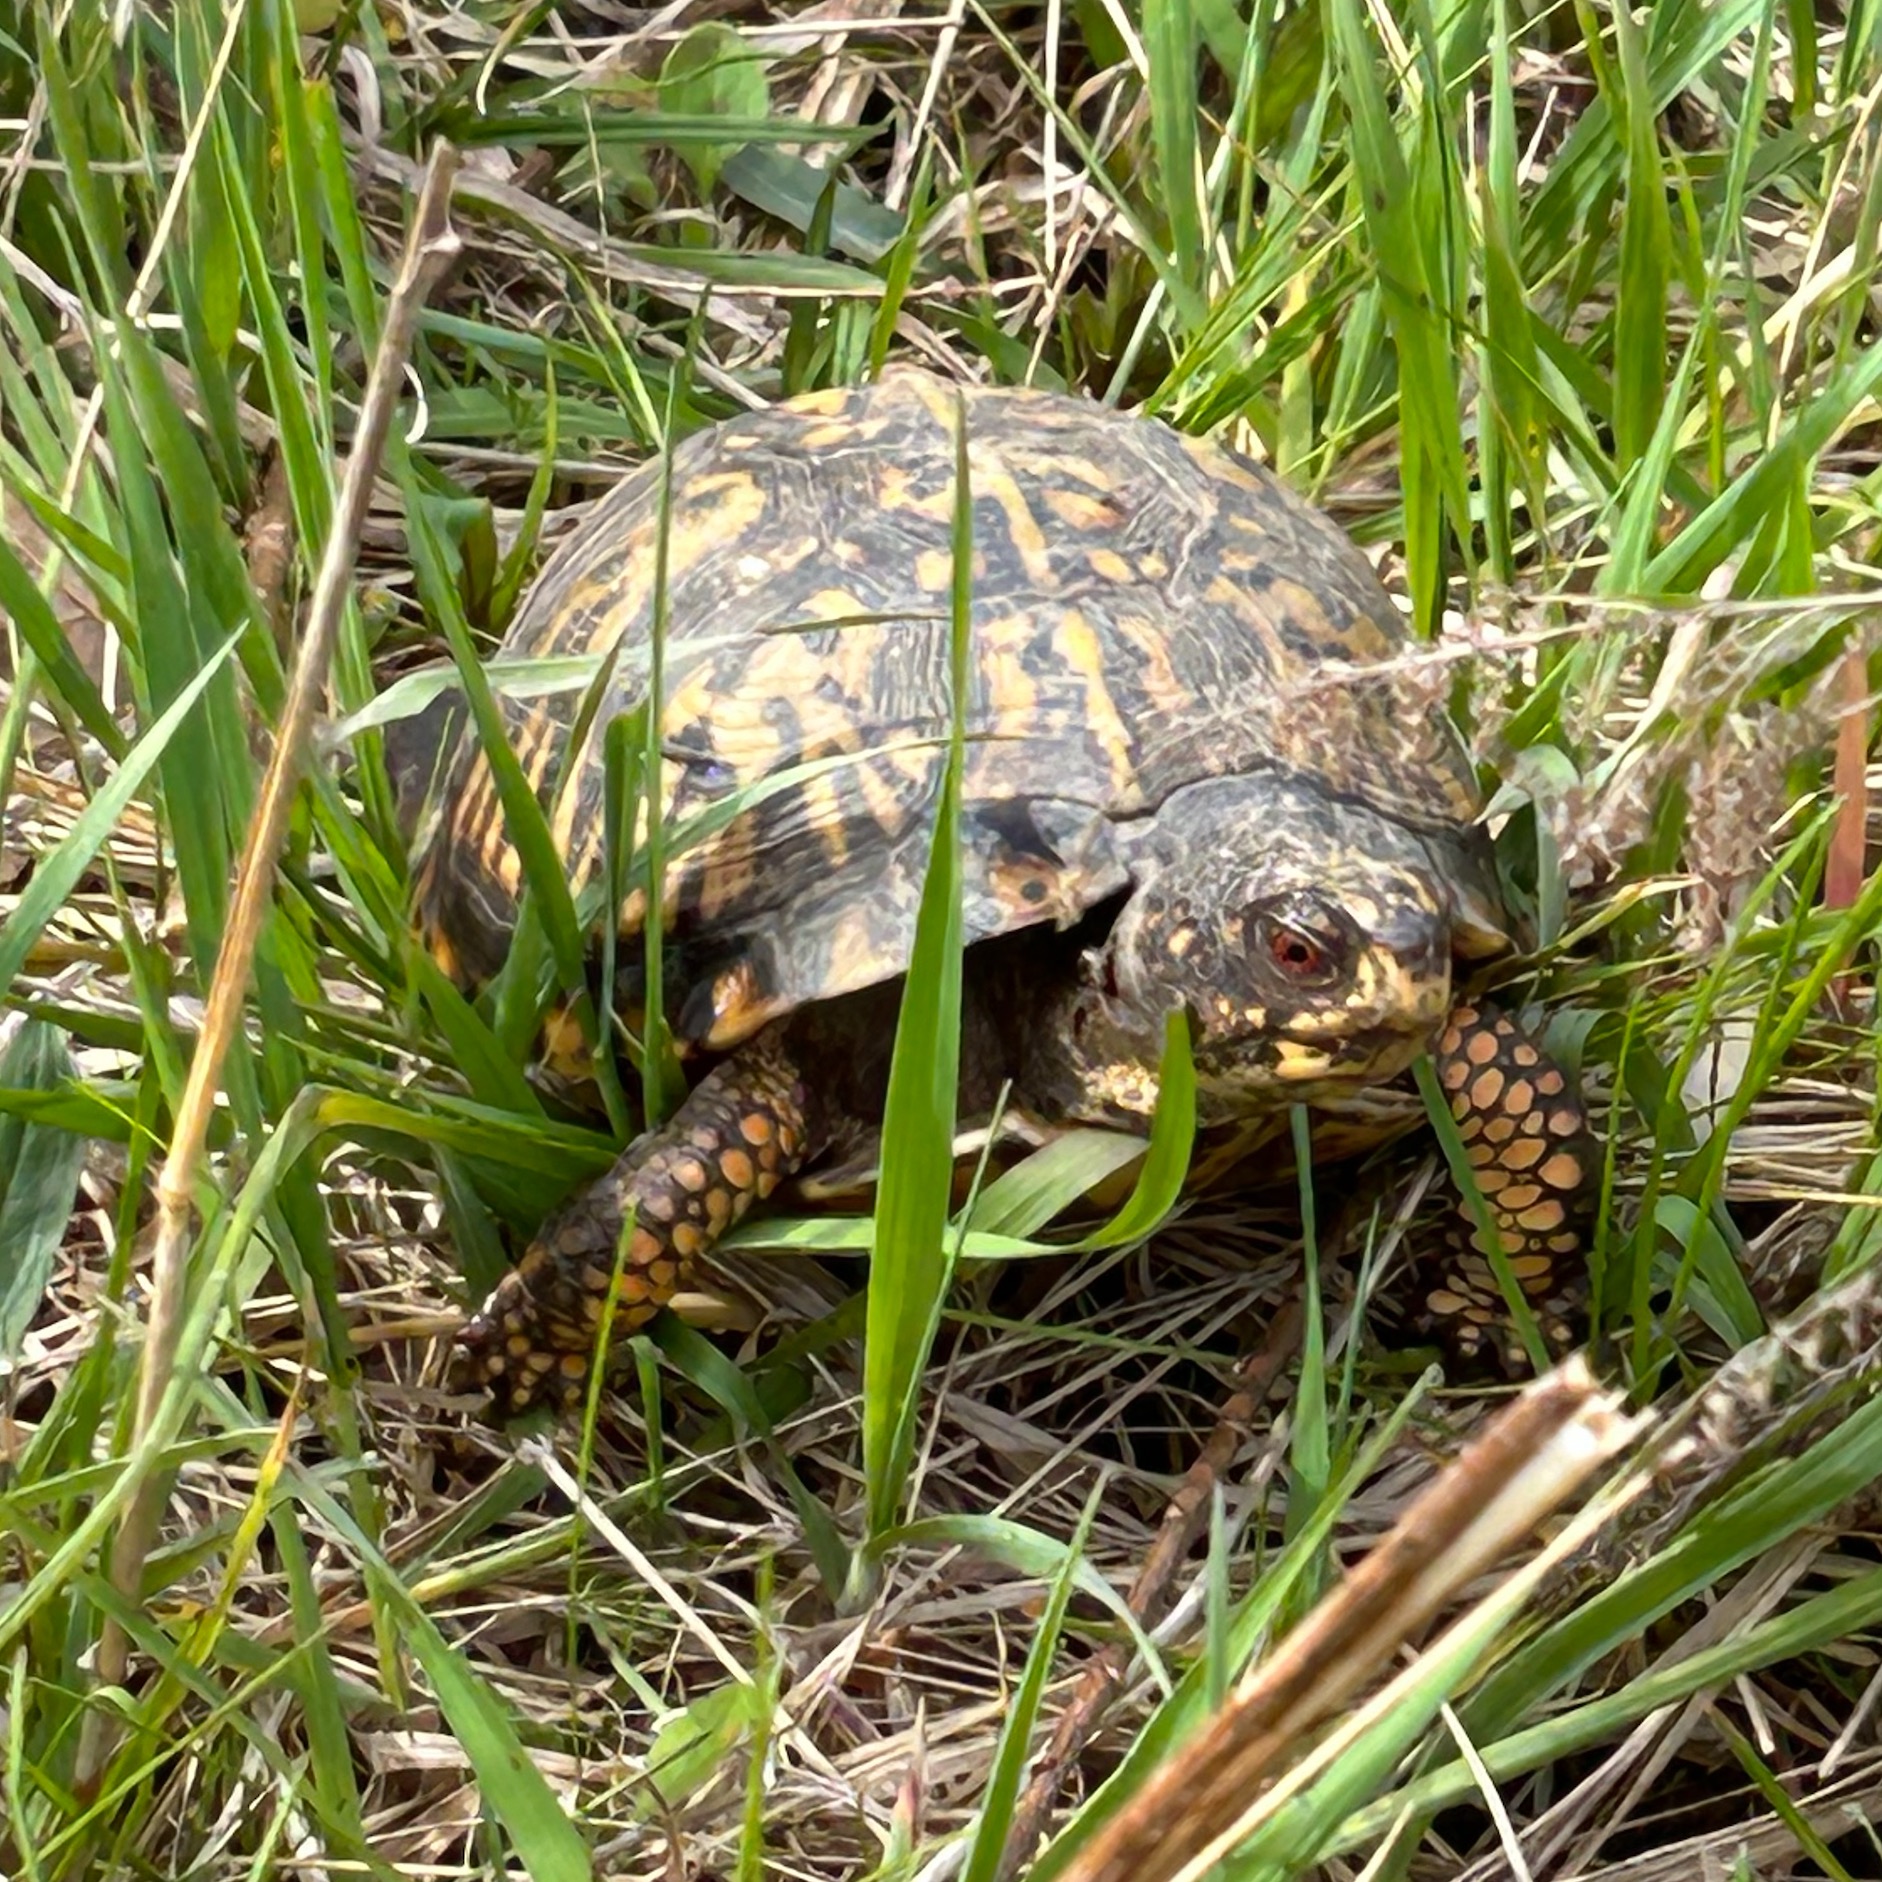 A box turtle in grass, from the front